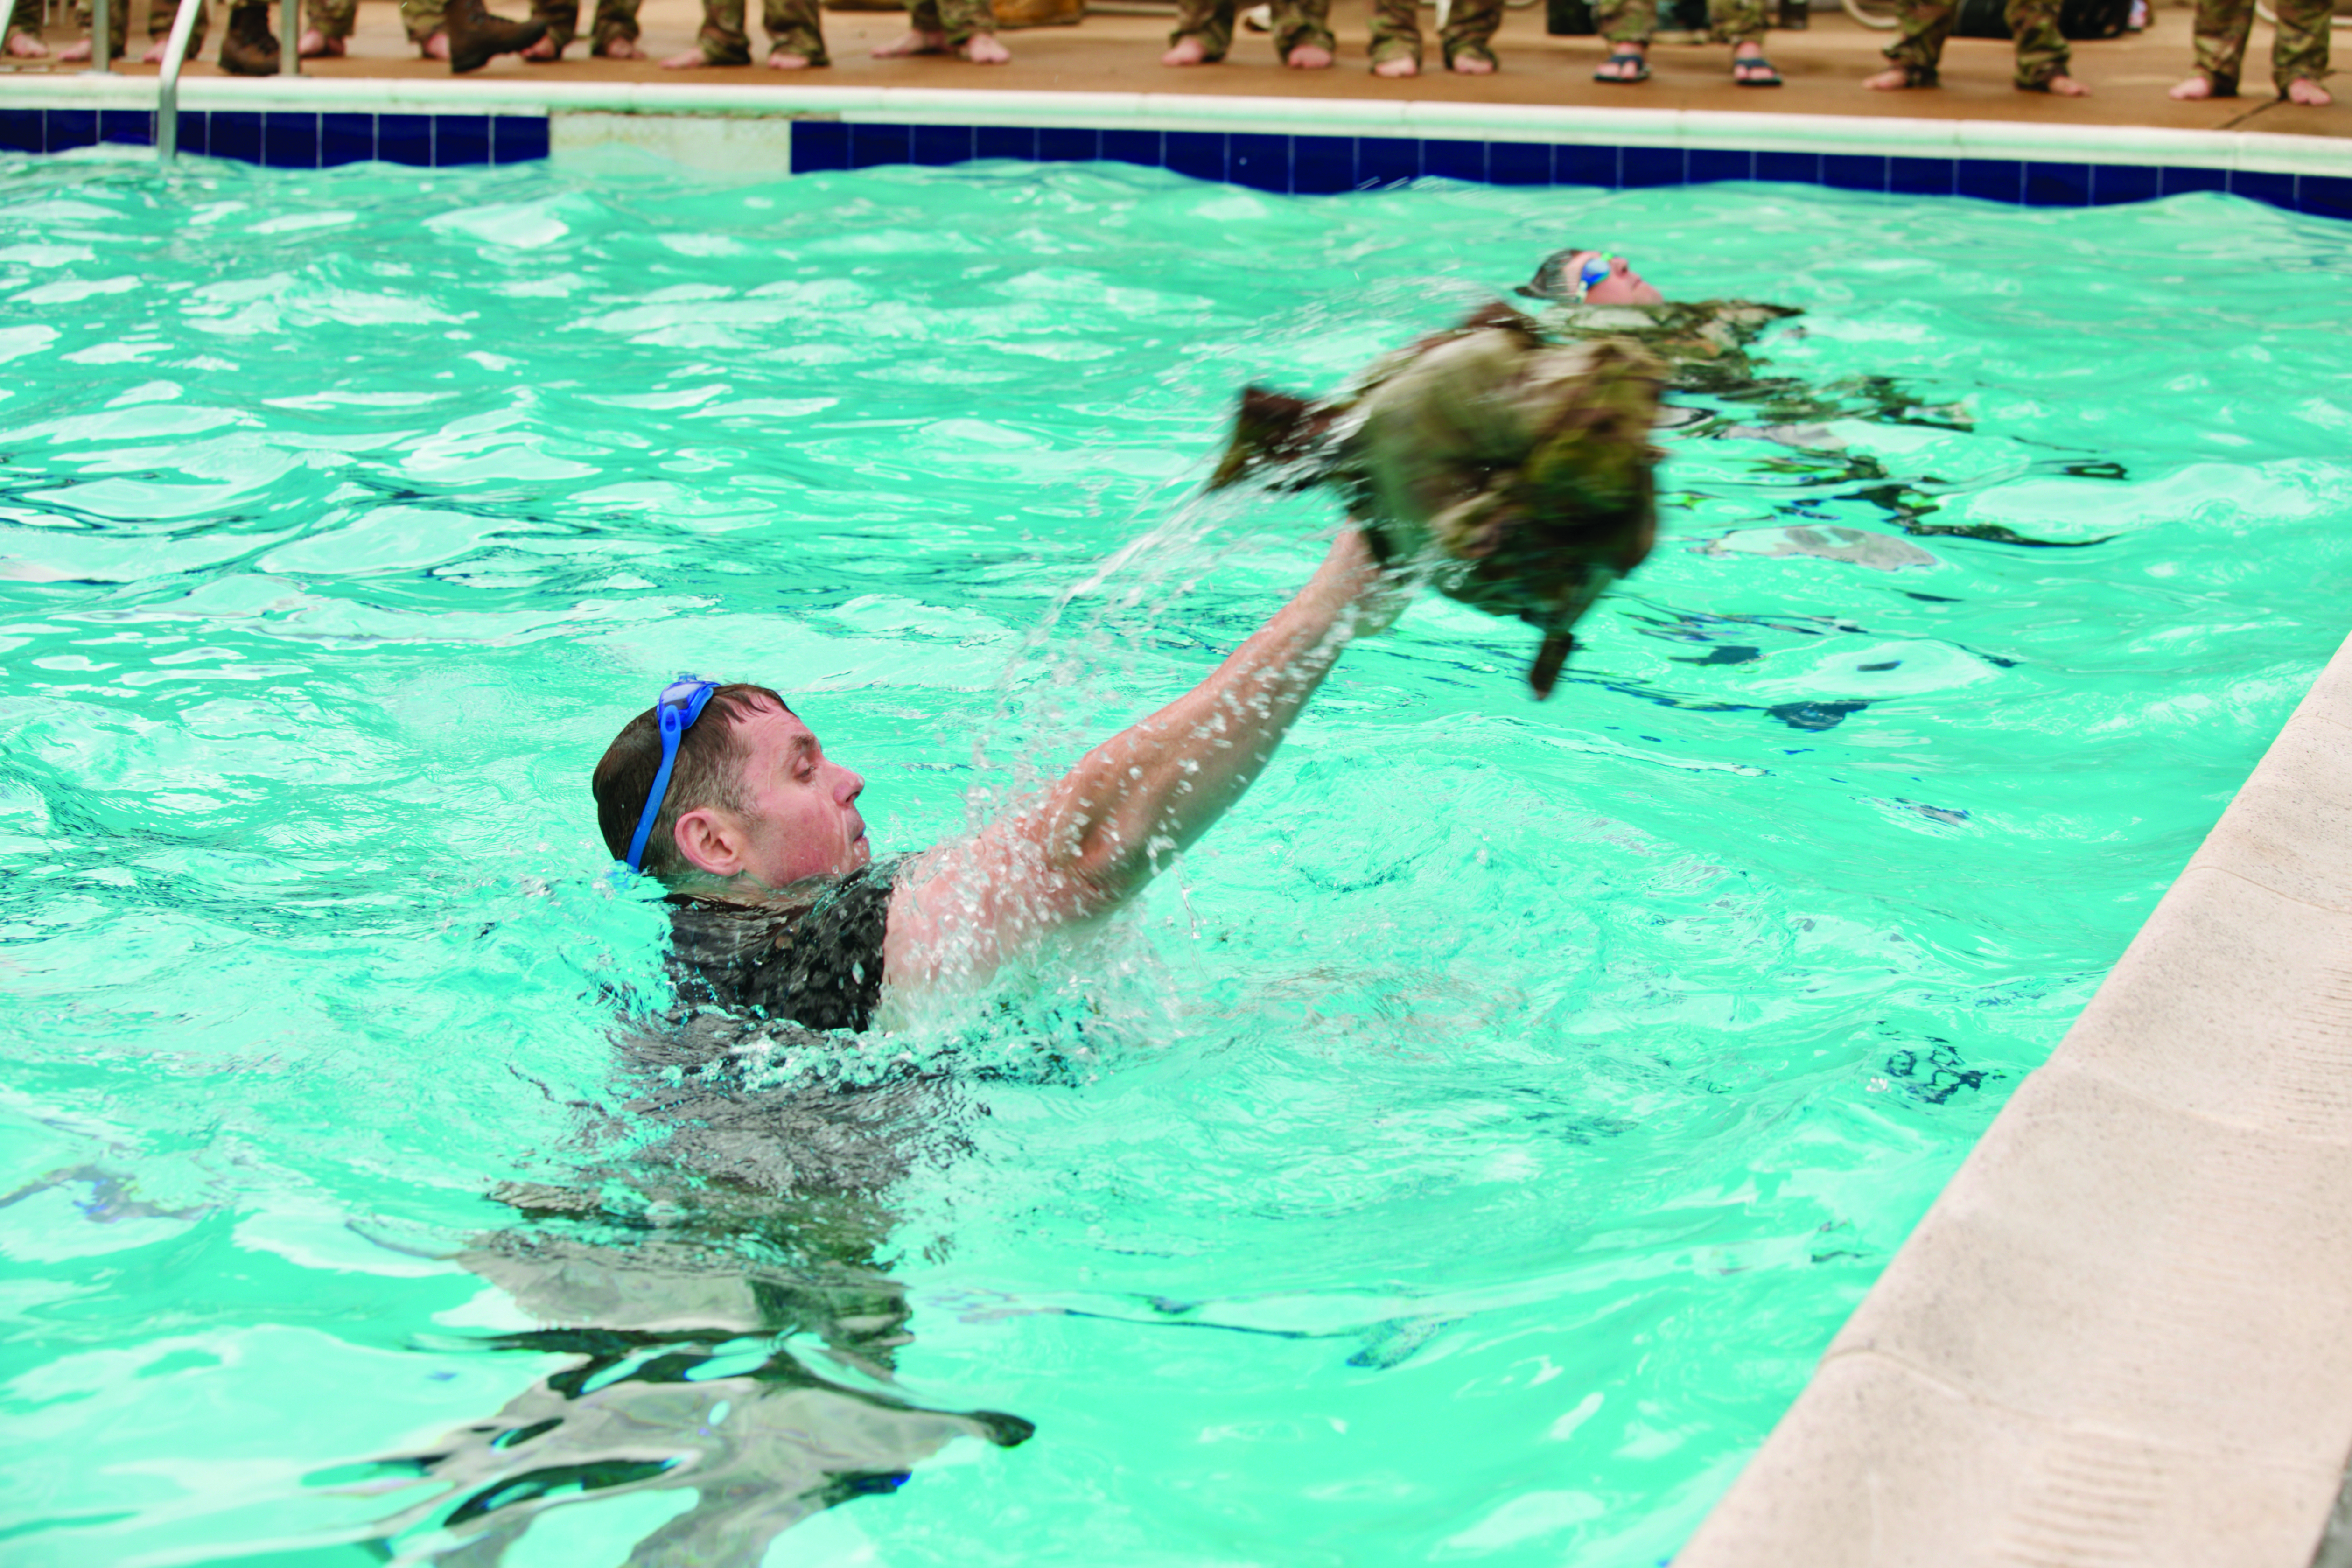 U.S. Army Reserve CPT John Cooper, a judge advocate assigned to the Military Intelligence Readiness Command, doffs his uniform in the pool during a German Armed Forces Badge event that the Defense Attaché staff of the Federal Republic of Germany officiated and the 3d Infantry Regiment (The Old Guard) hosted on Joint Base Myer-Henderson Hall, VA. The German Armed Forces Proficiency Badge is a German military award similar to the U.S. Army’s Expert Soldier Badge and consists of knowledge and skills-based tasks, a physical fitness test, pistol marksmanship, a swim event, and a ruck march. (Credit: MAJ Joshua Frye)